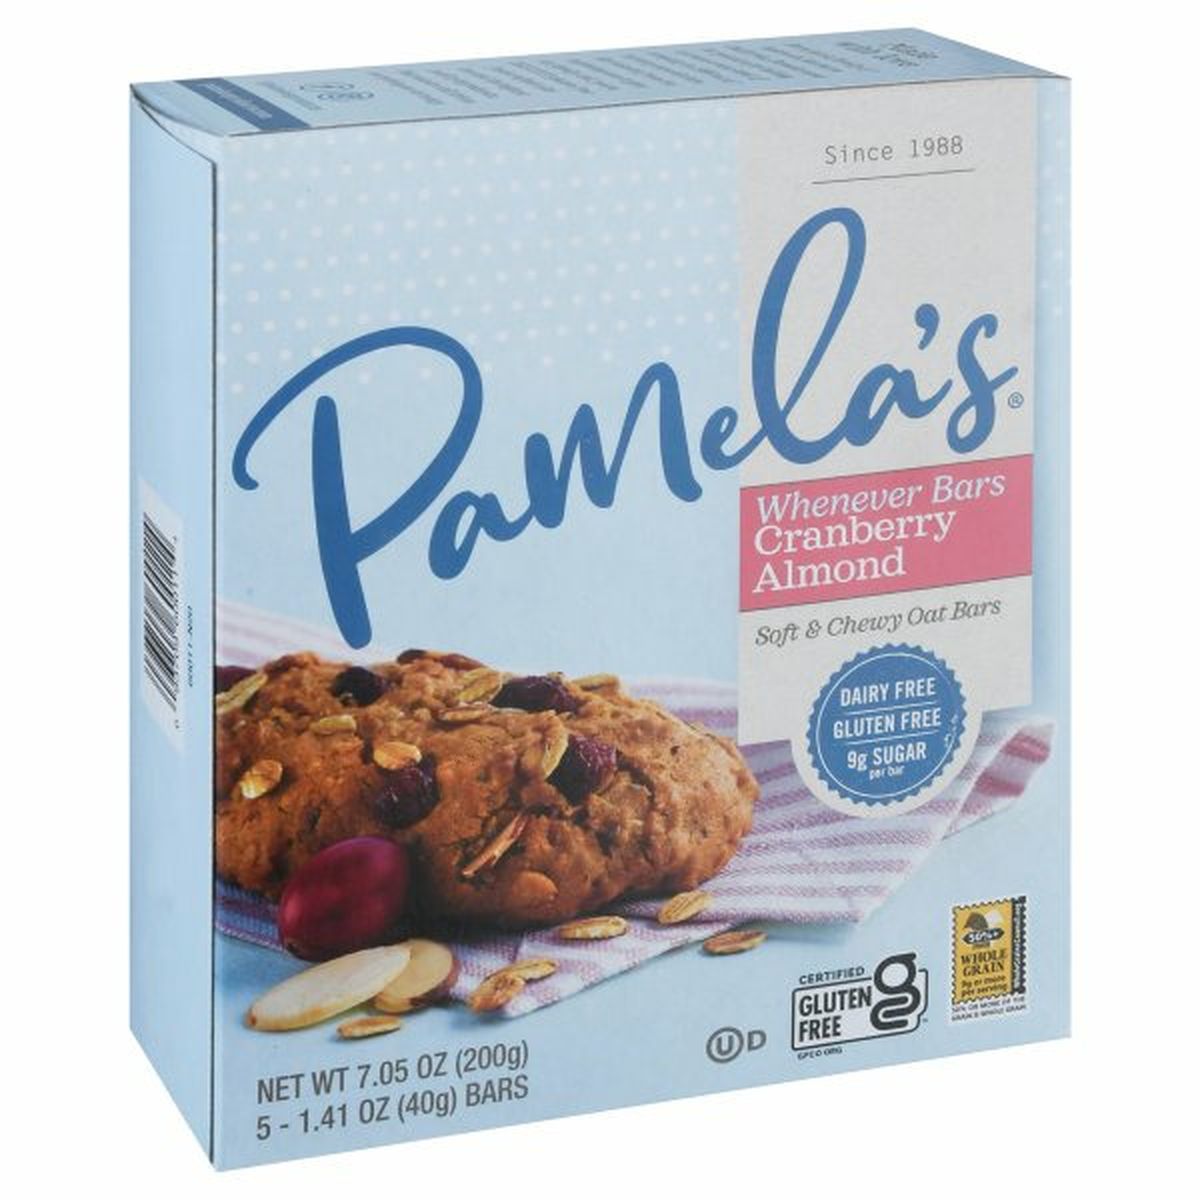 Calories in Pamela's Whenever Bars Oat Bars, Soft & Chewy, Cranberry Almonds